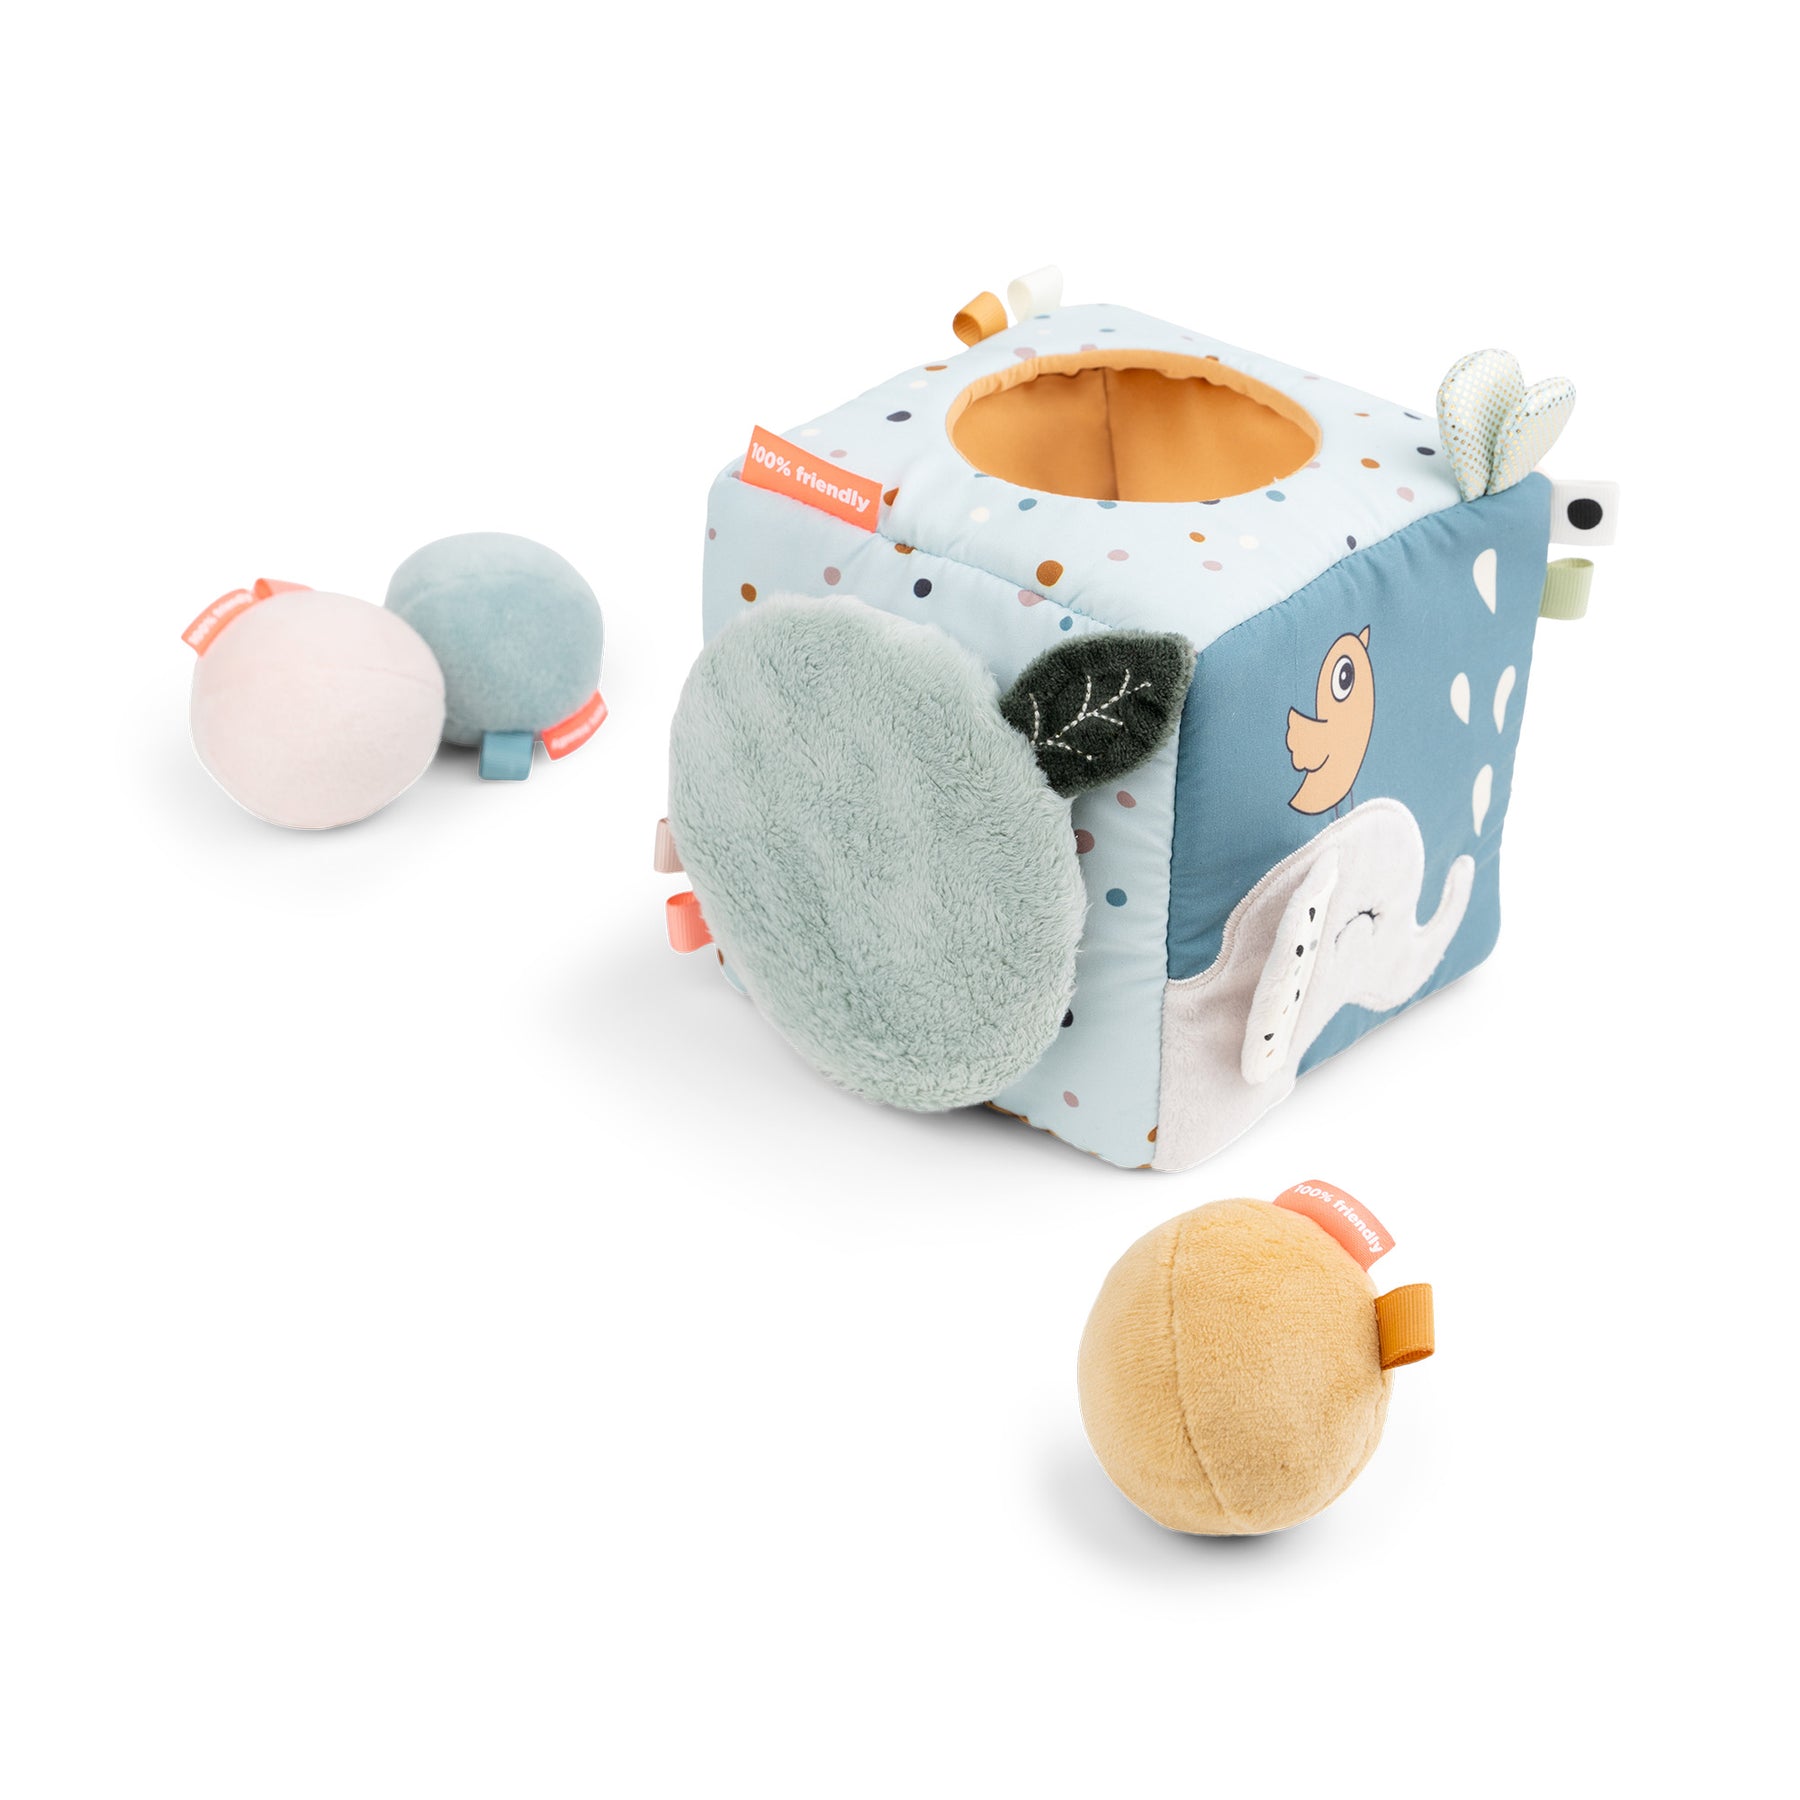 Discovery cube - Deer friends - Colour mix - Front